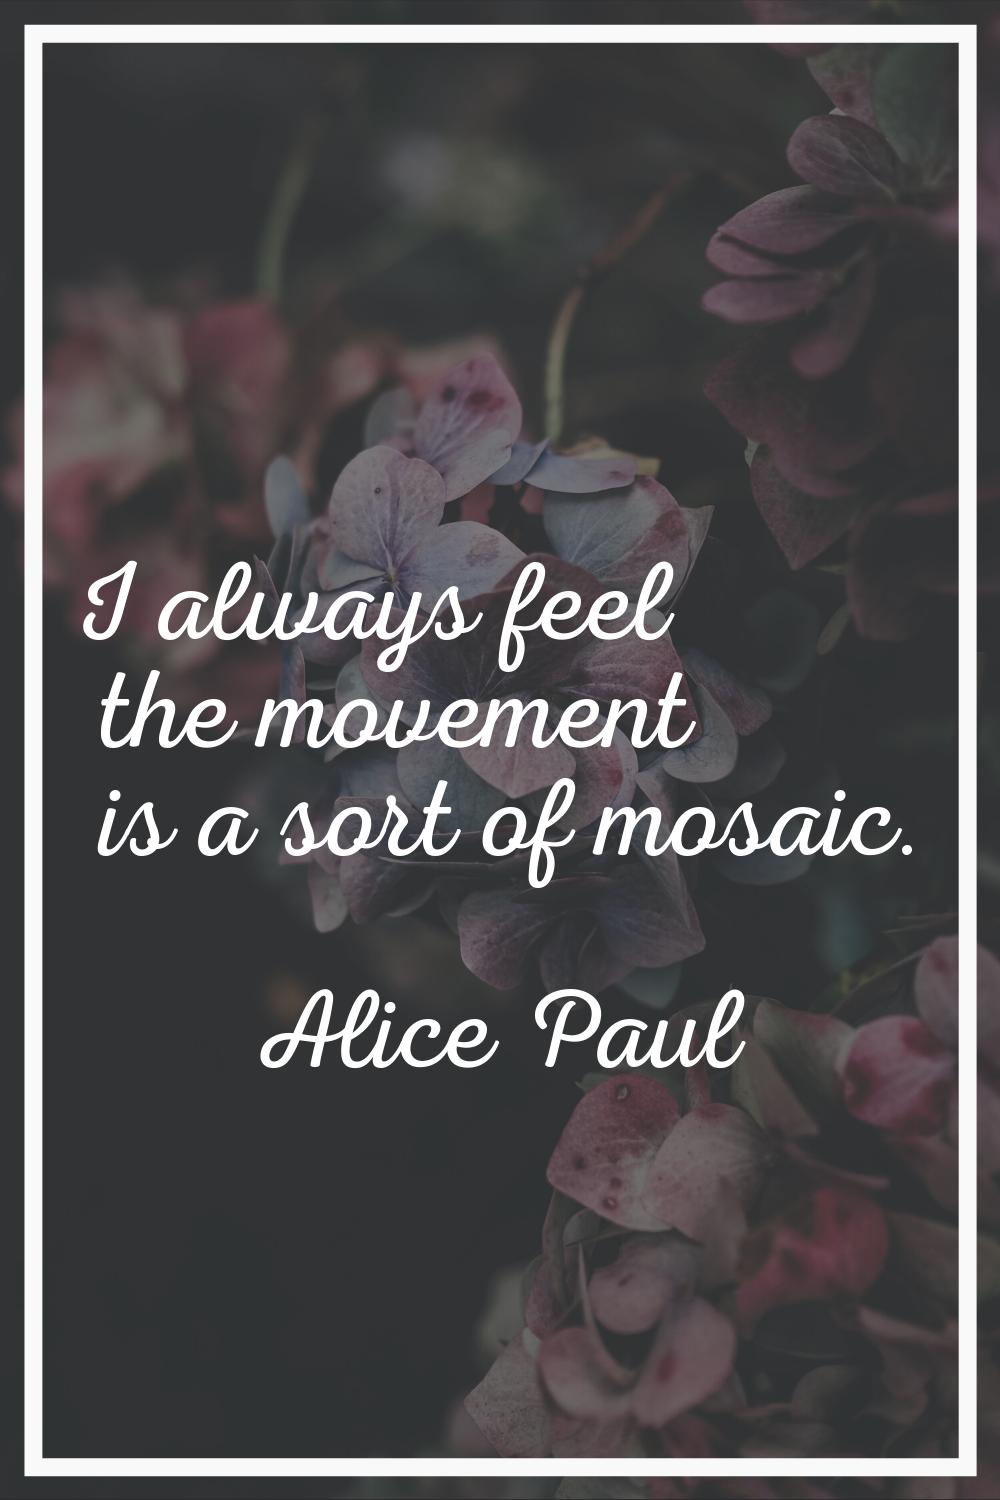 I always feel the movement is a sort of mosaic.